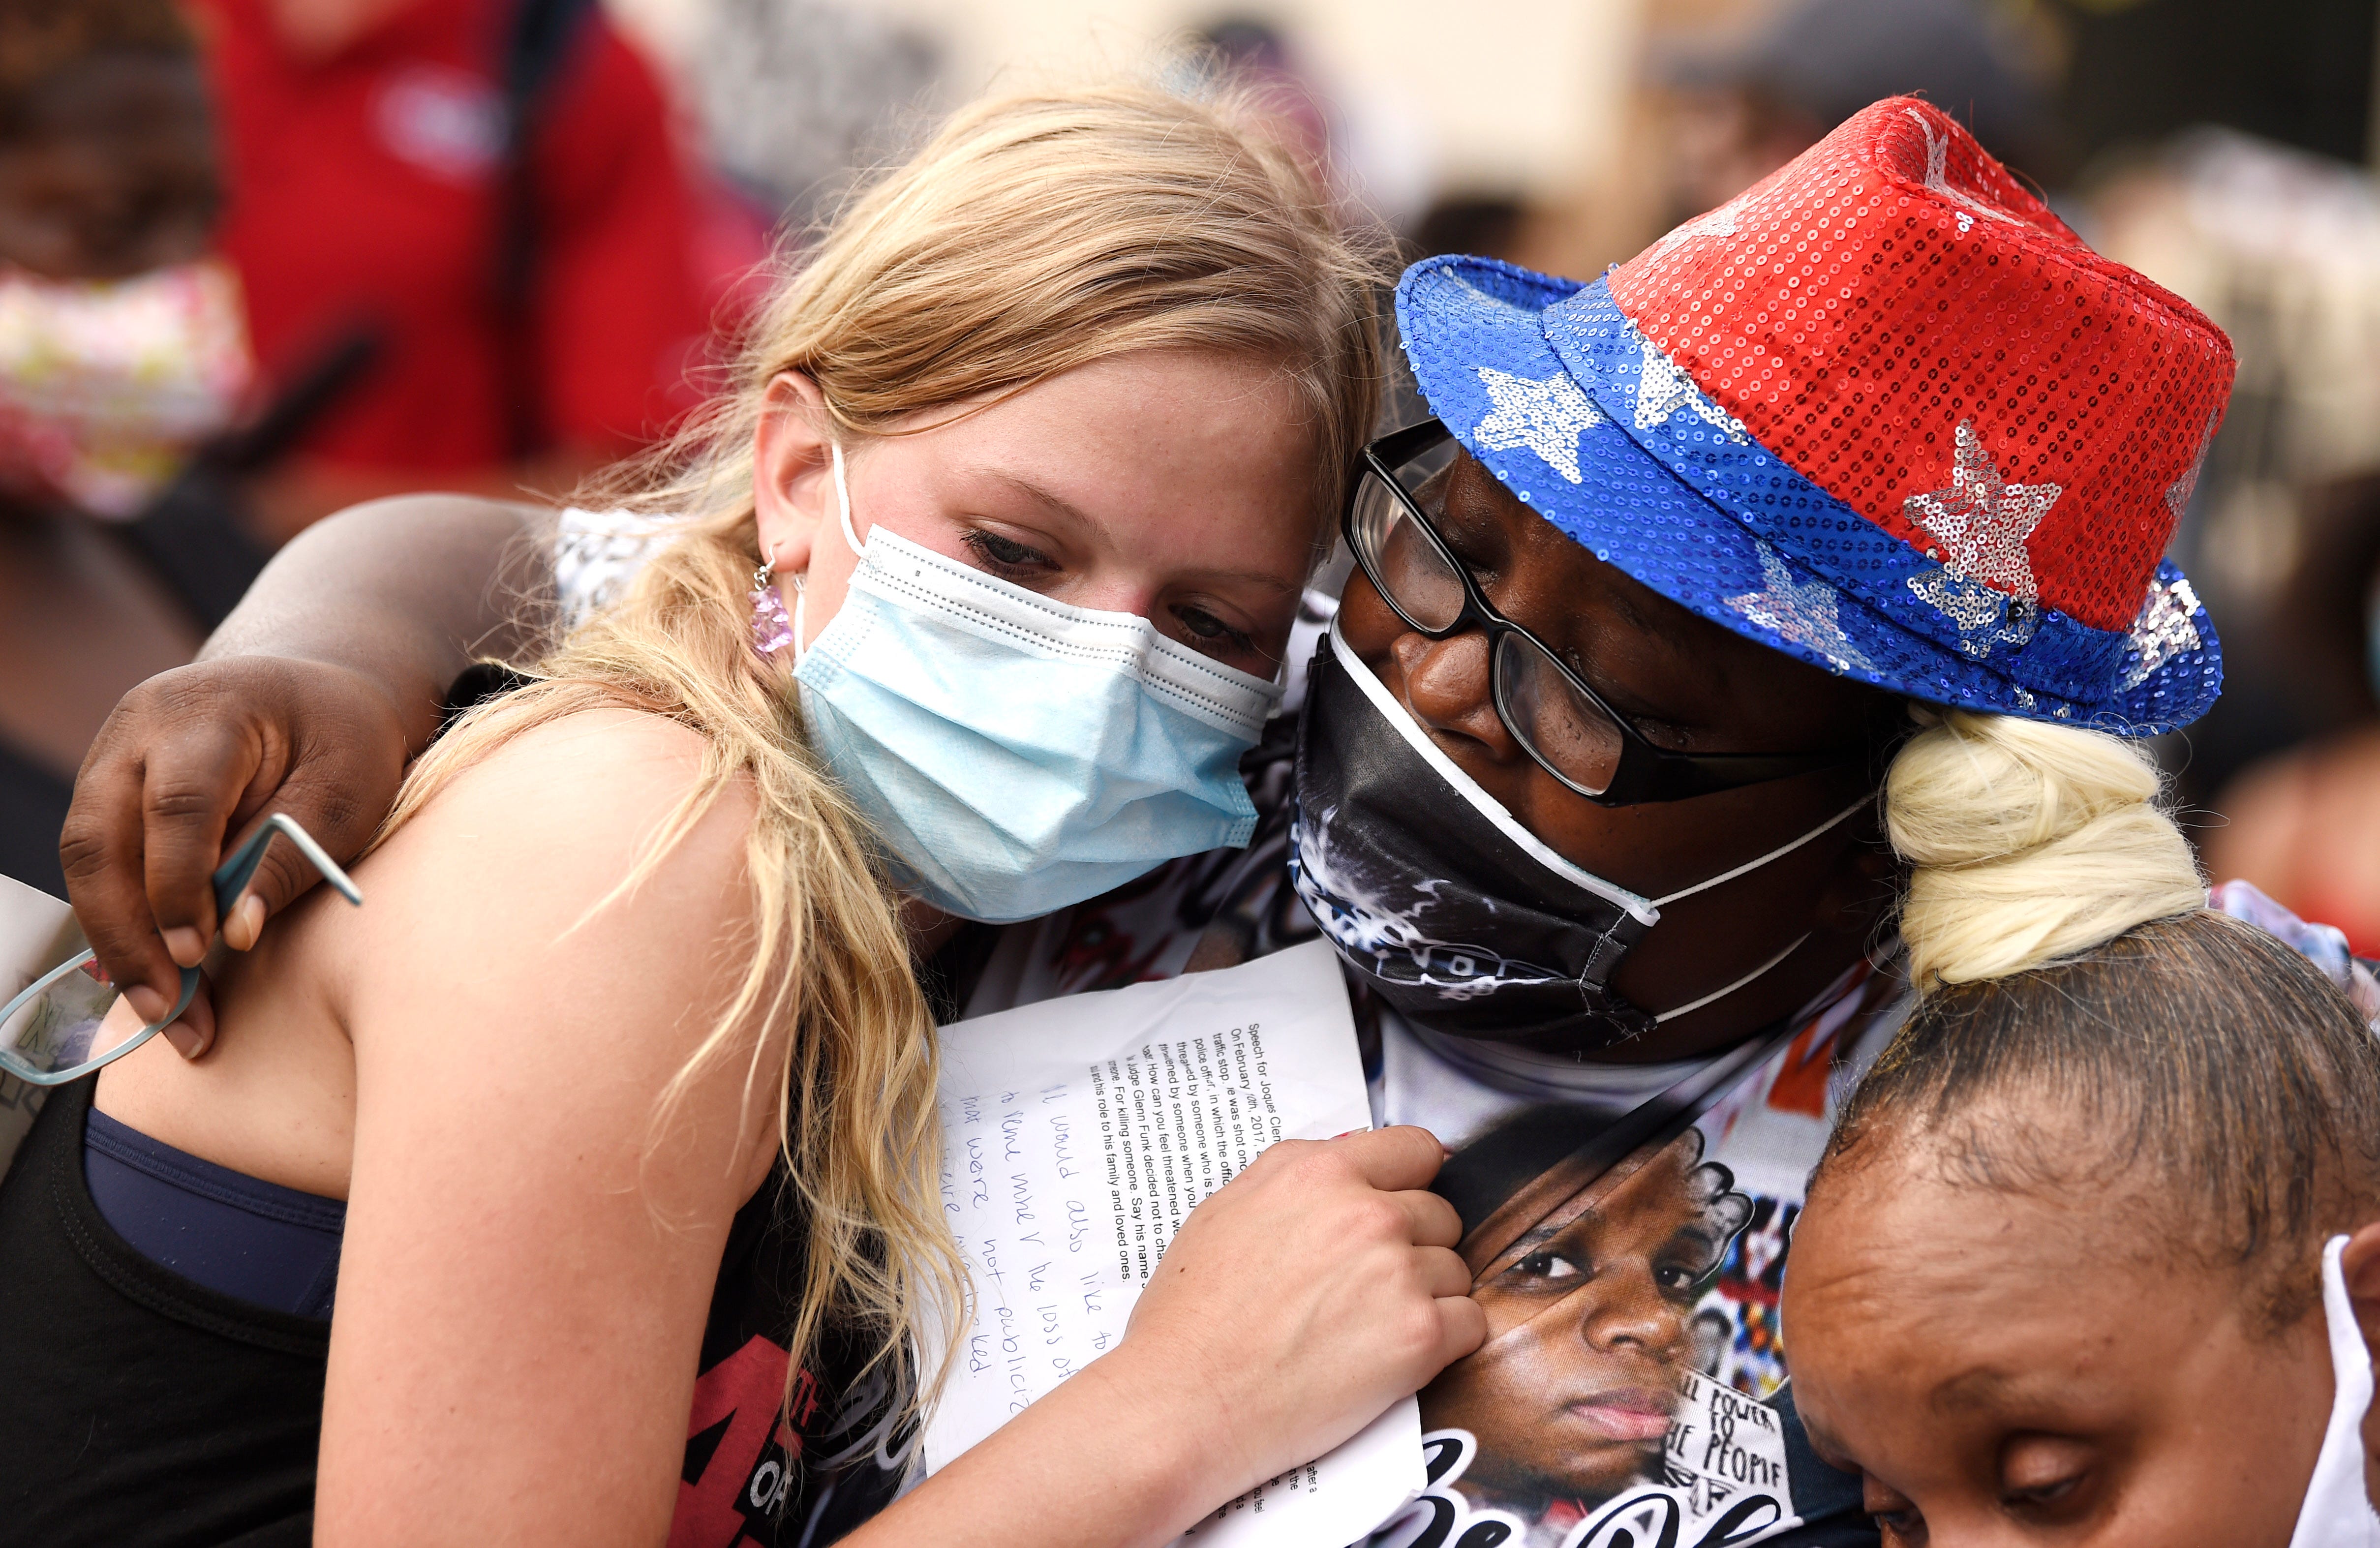 Sheila Clemmons Lee, mother of Jocques Clemmons, hugs  Emma Rose Smith, one of the leaders of Teens 4 Equality,  during the "Red, Black and Blue" protest outside Legislative Plaza in Nashville, Tenn., Saturday, July 4, 2020. Jocques Clemmons was fatally shot by Metro Police.The group Teens 4 Equality organized the rally and march.